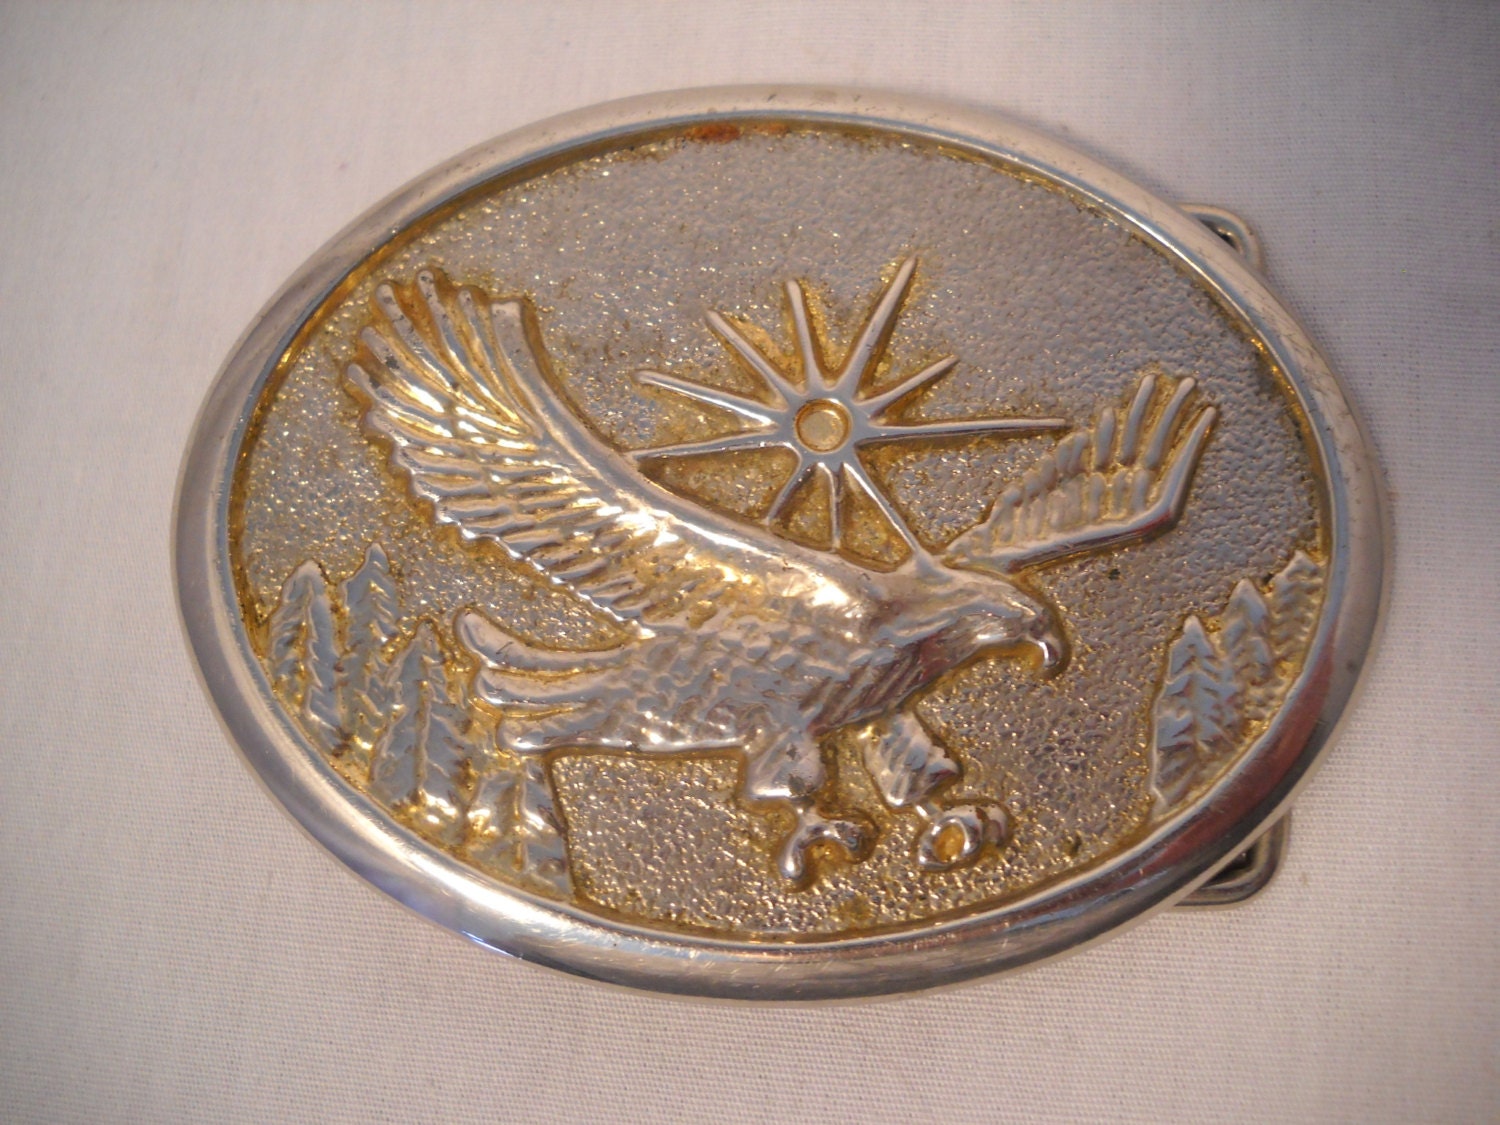 Vintage Eagle Belt Buckle by SeaPillowTreasures on Etsy